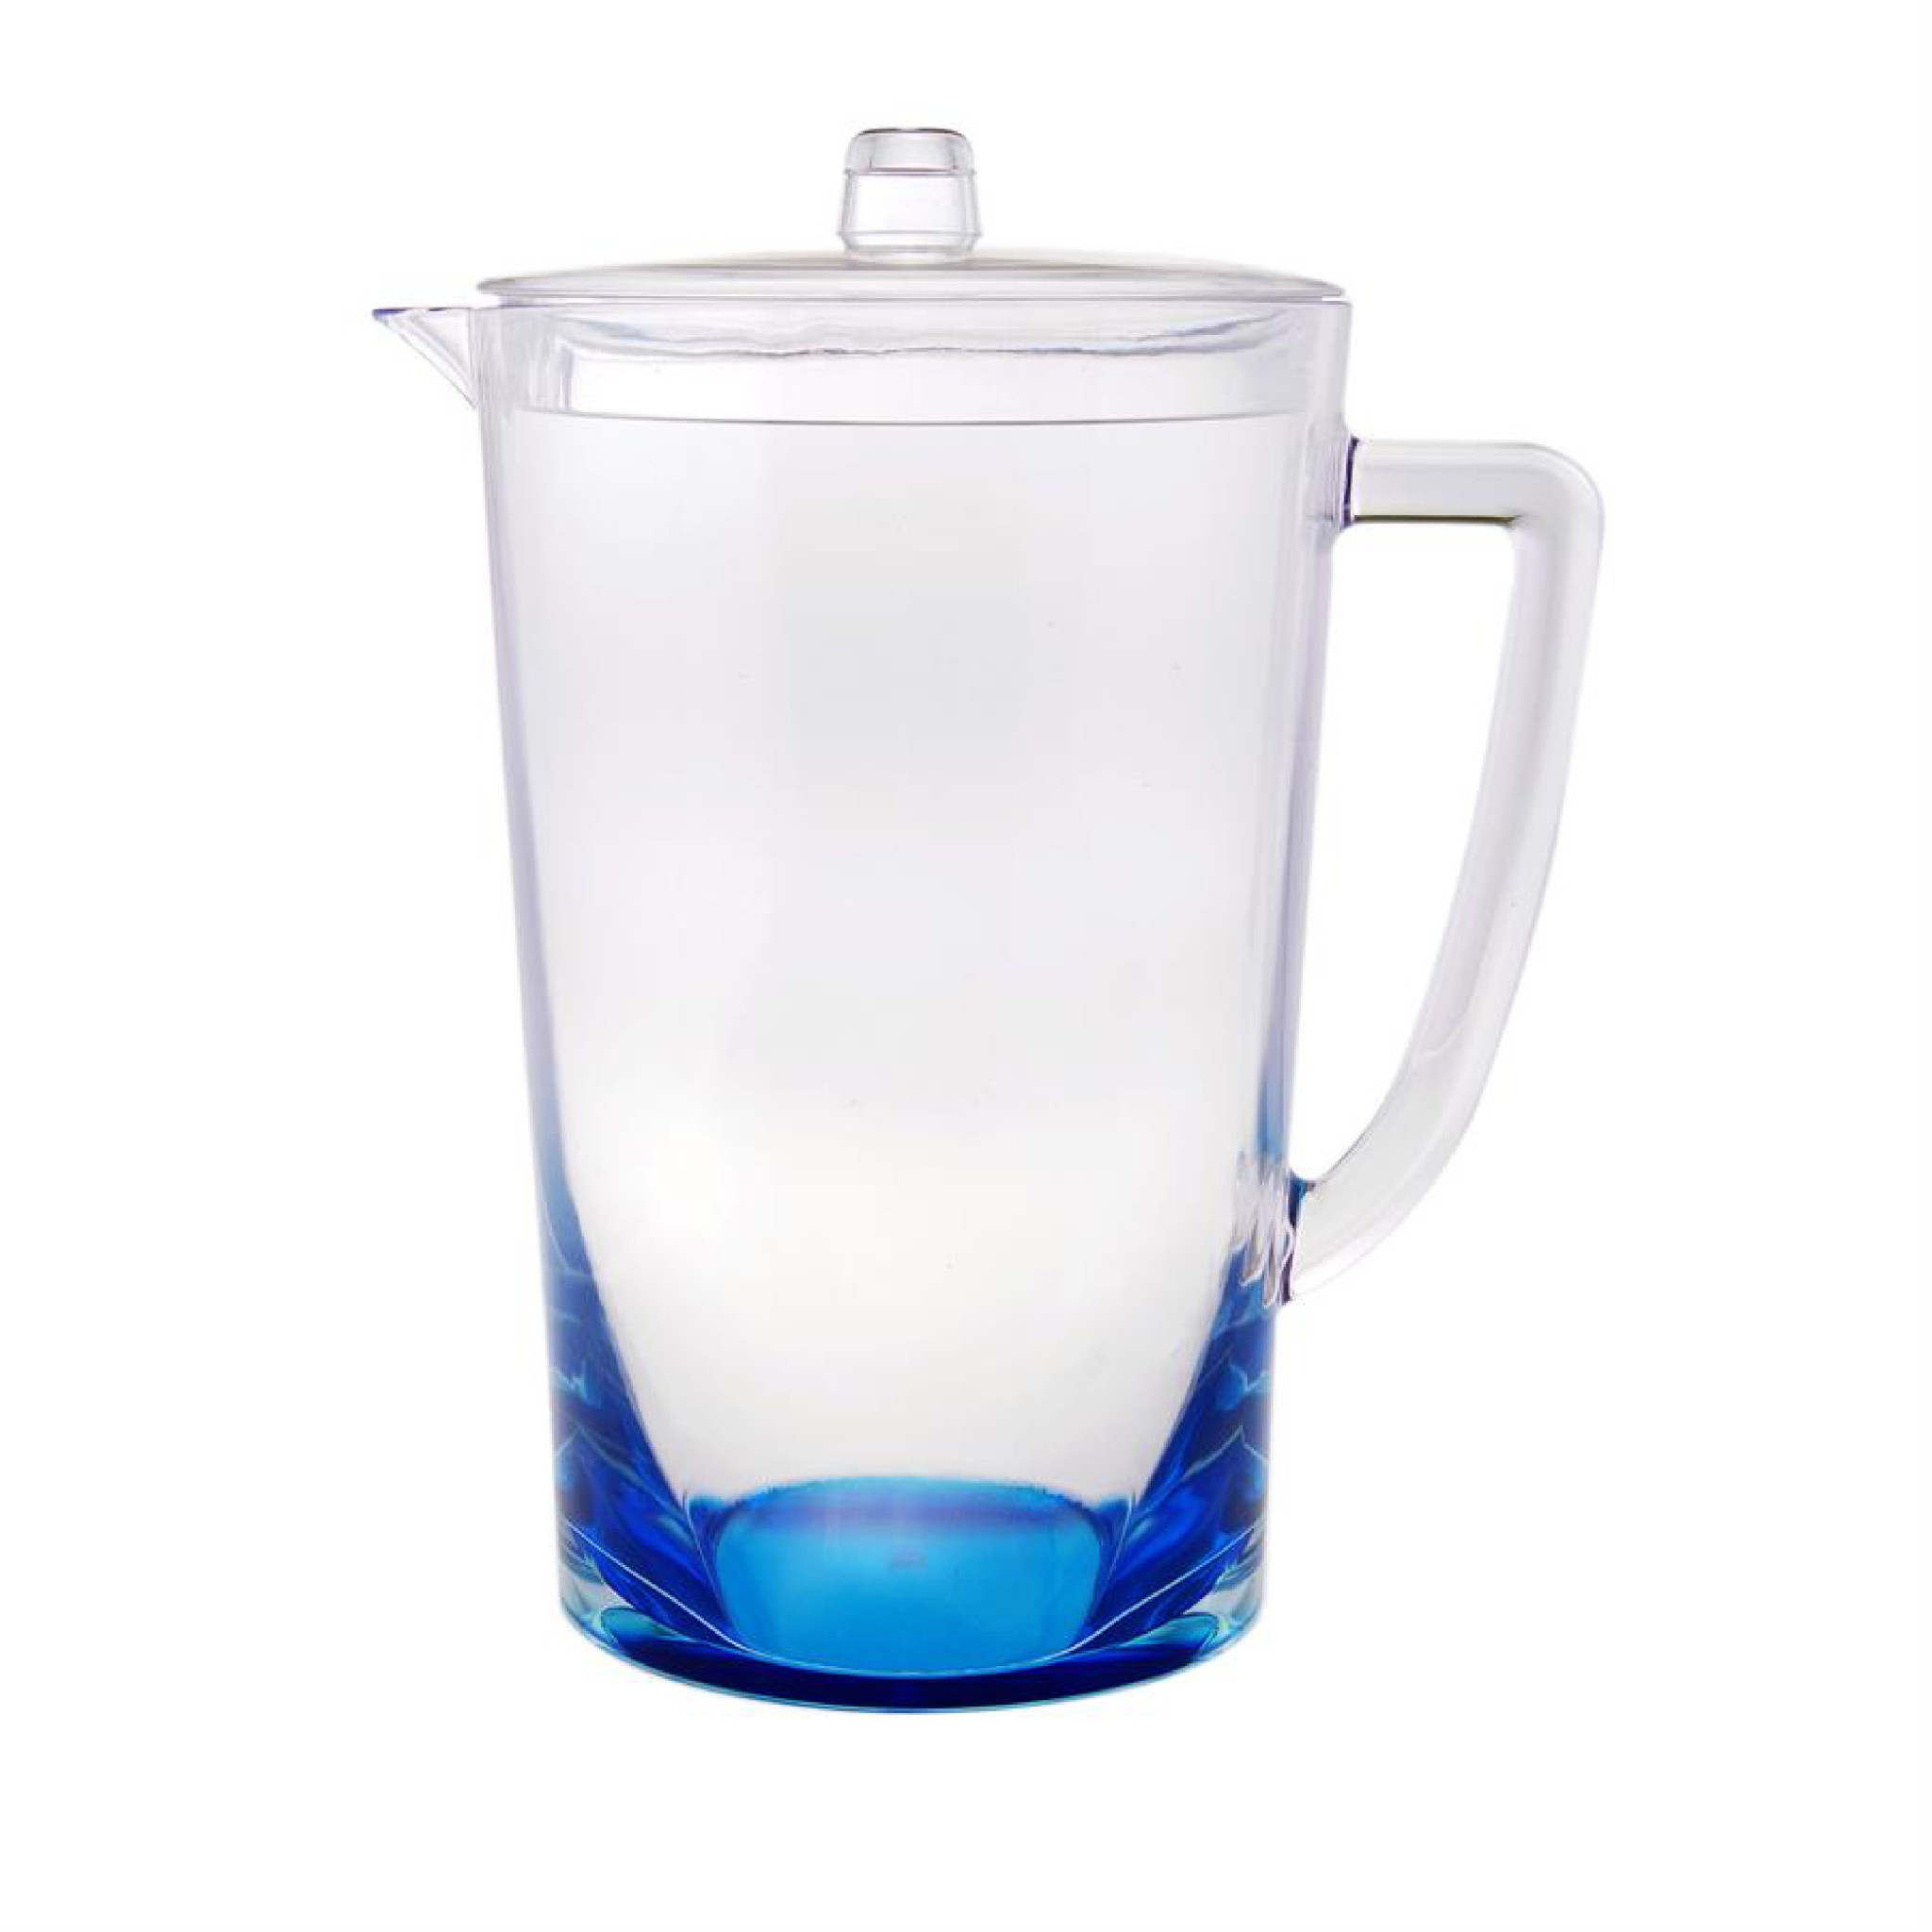 2.75 Quart Clear and Blue Acrylic Pitcher-523325-1